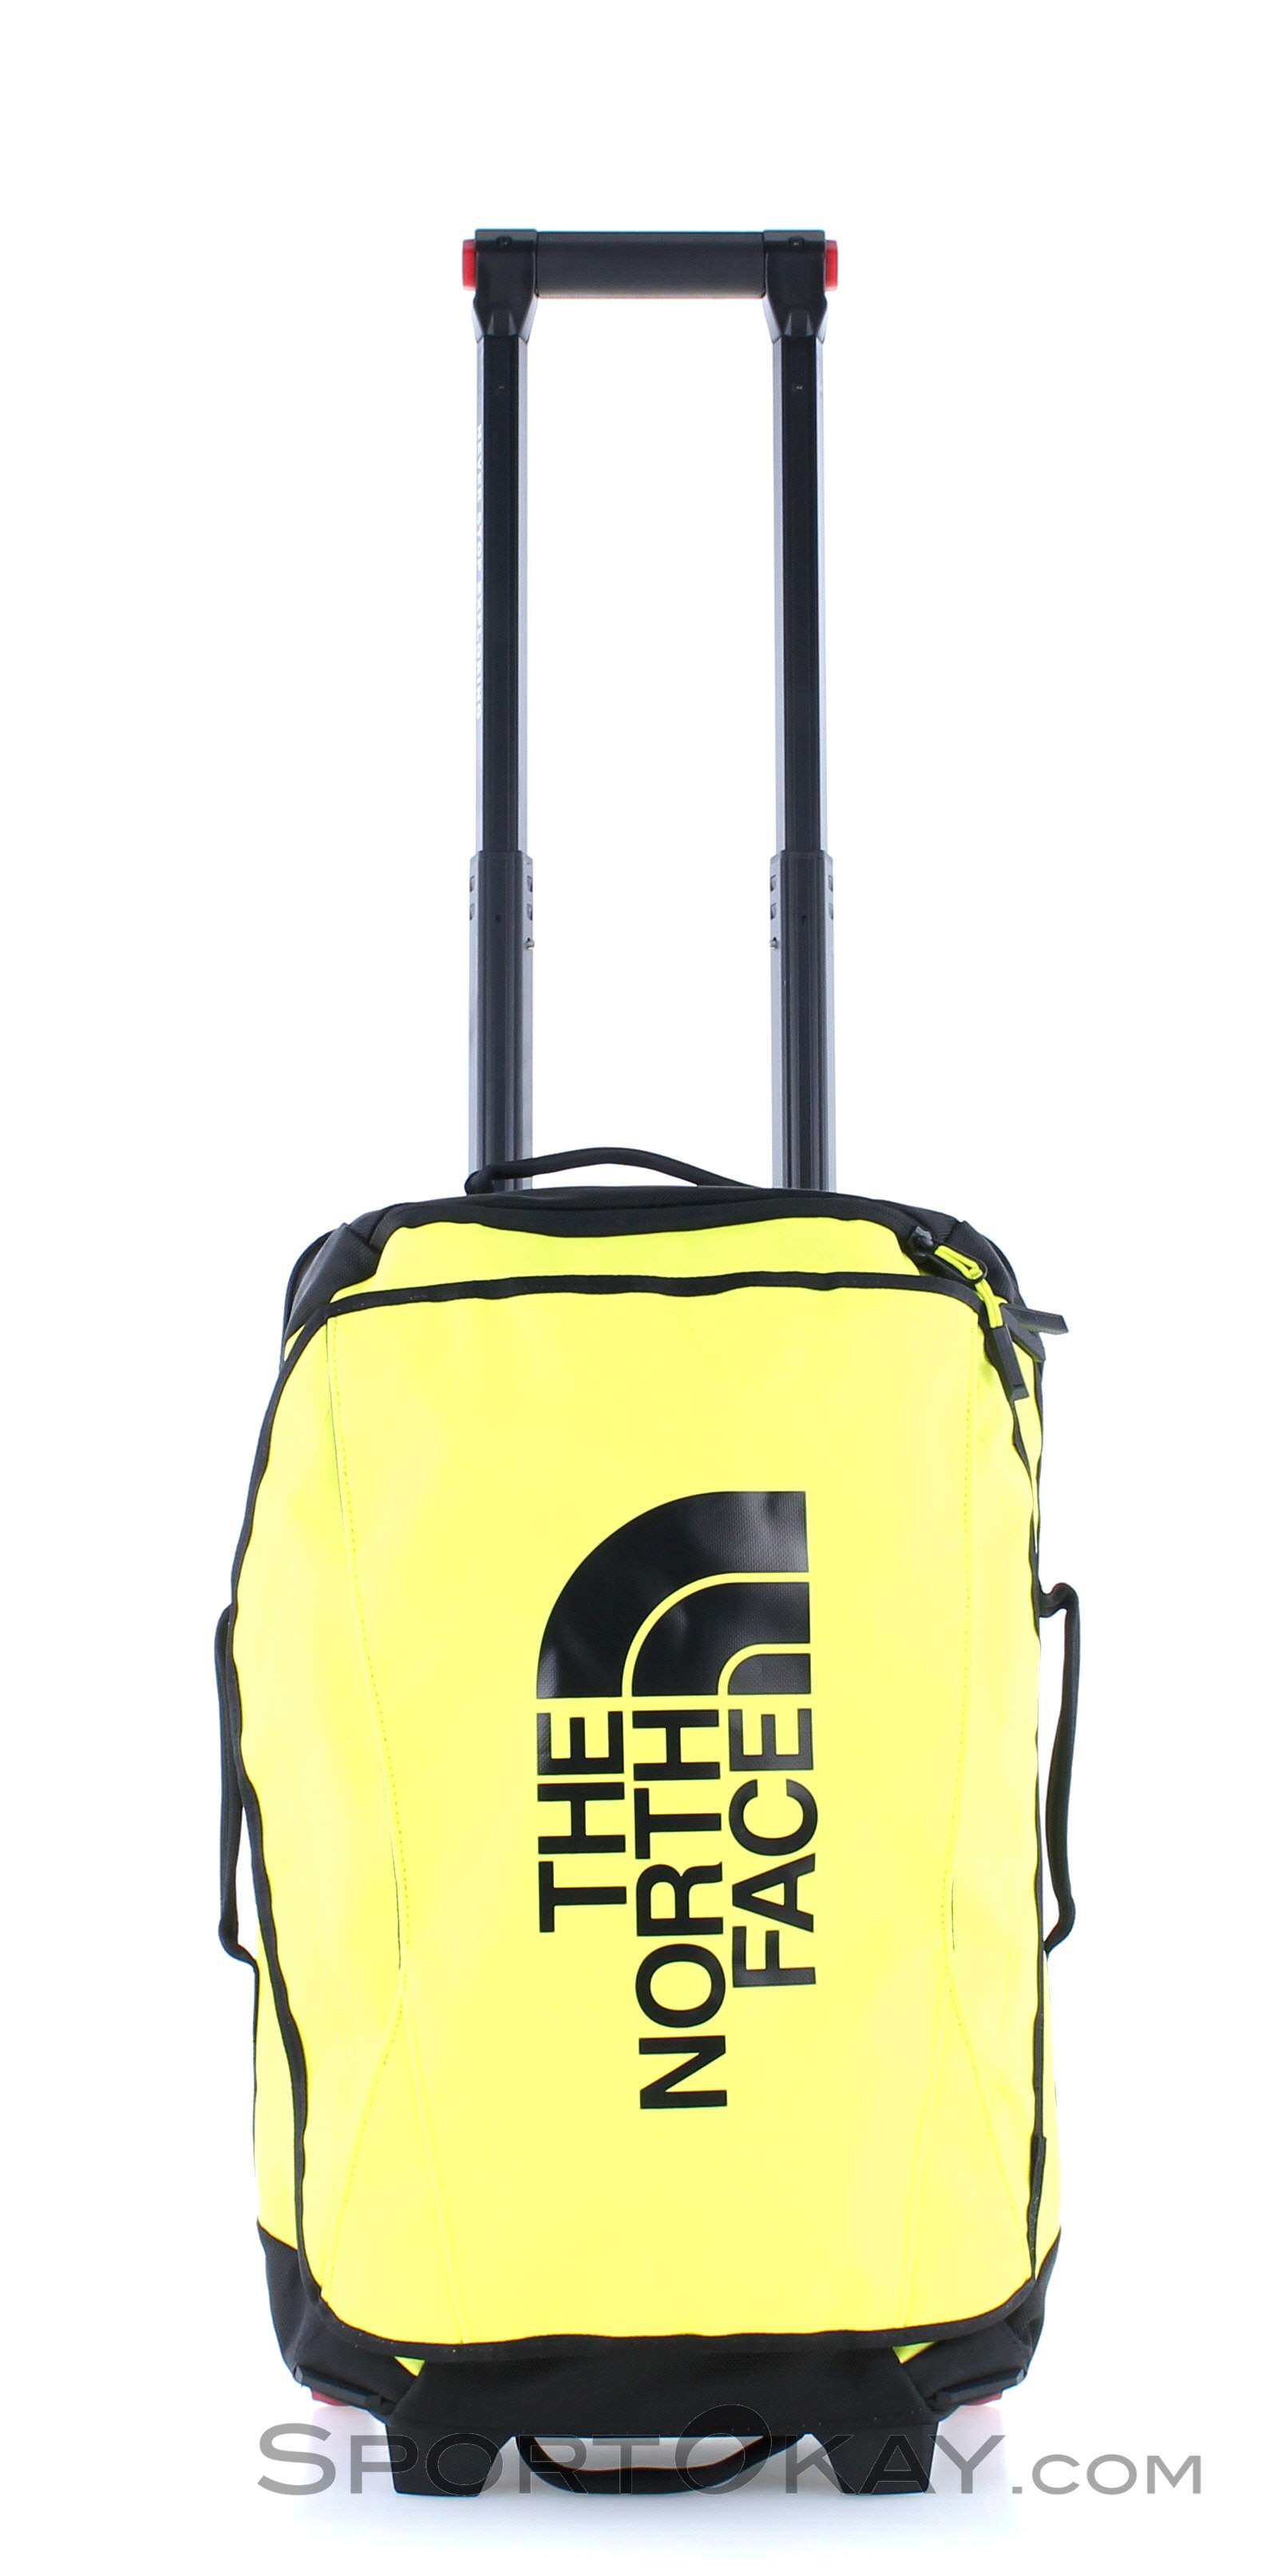 infrastructuur Bij naam Rechtdoor The North Face Rolling Thunder 22 Suitcase - Bags - Leisure Bags - Fashion  - All